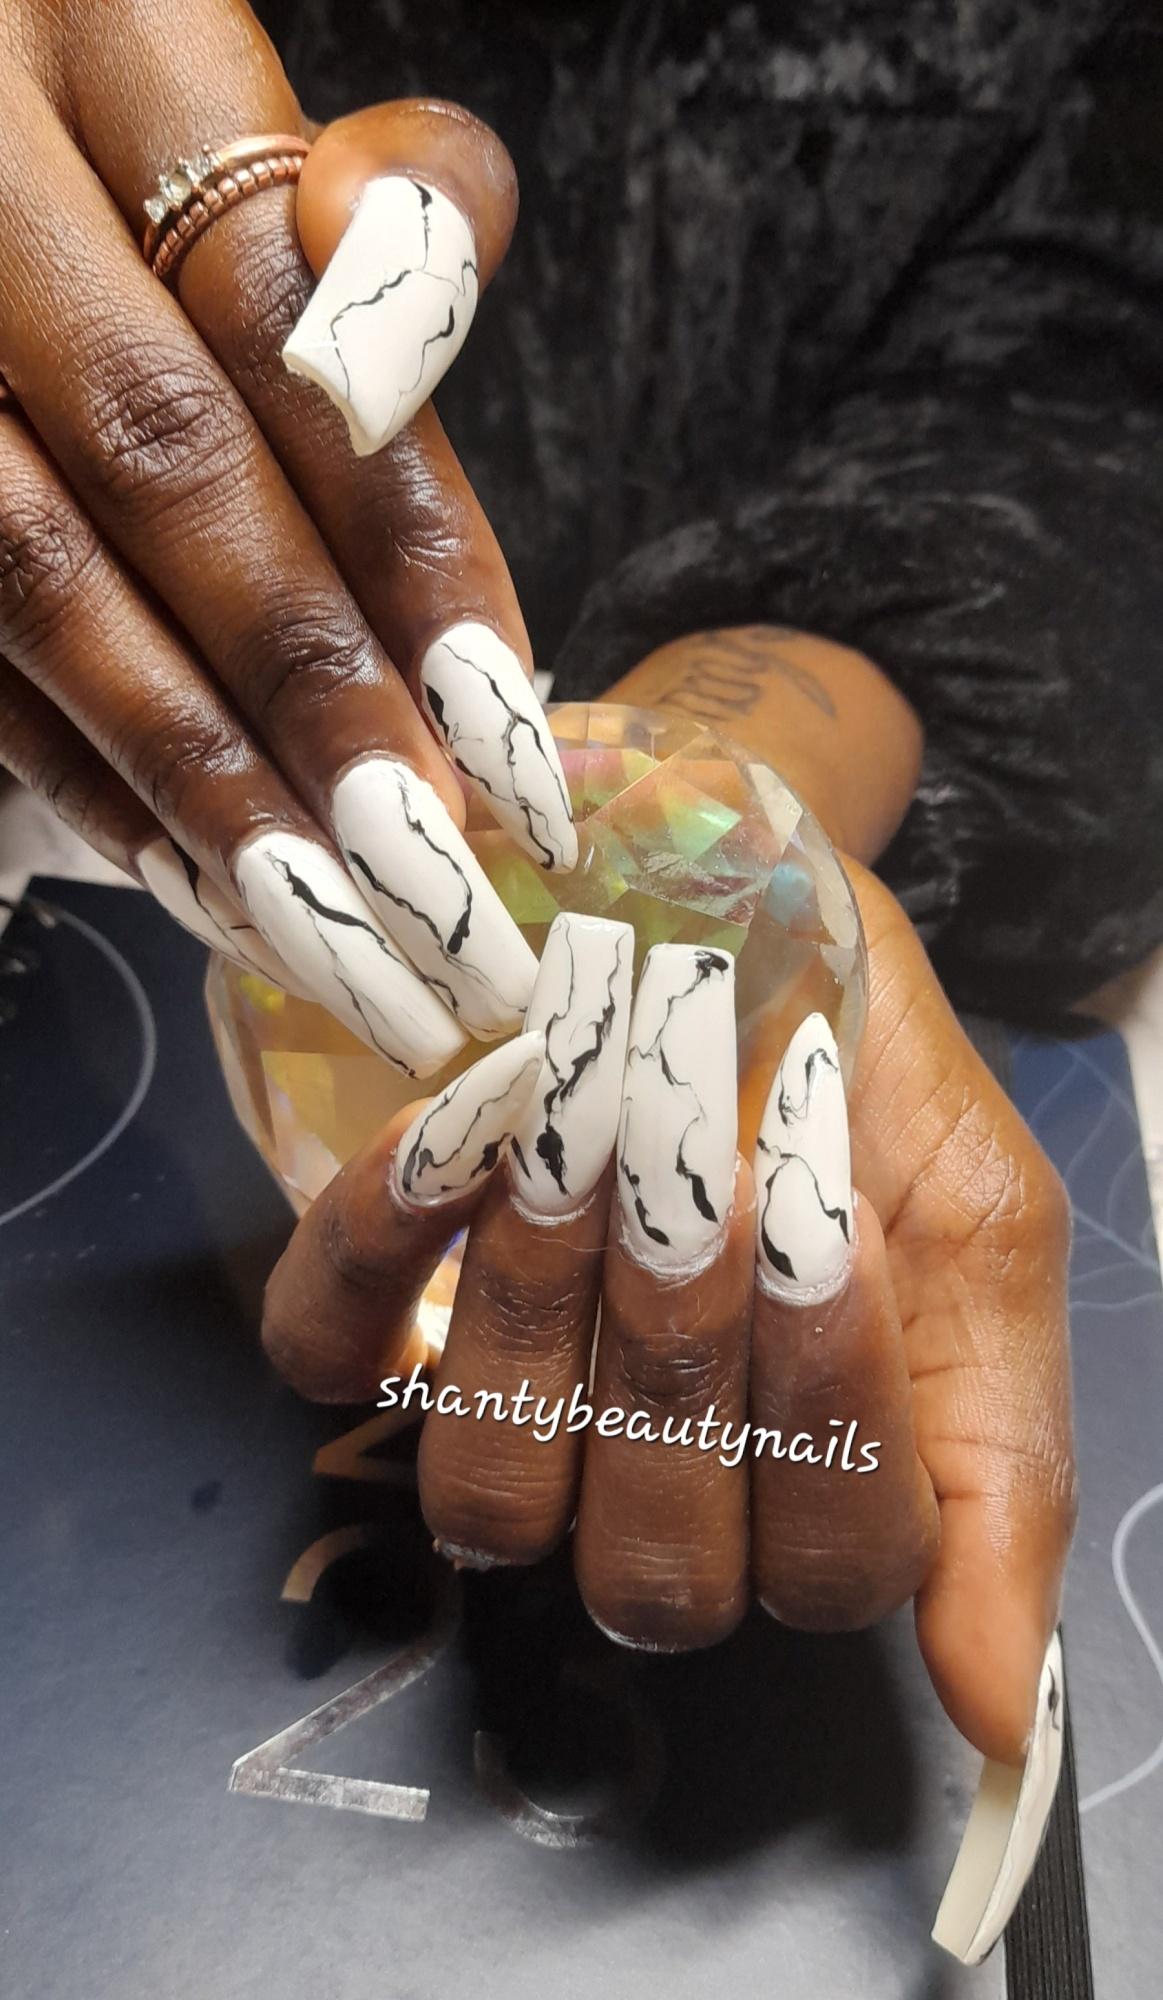 Shantybeautynails Troyes